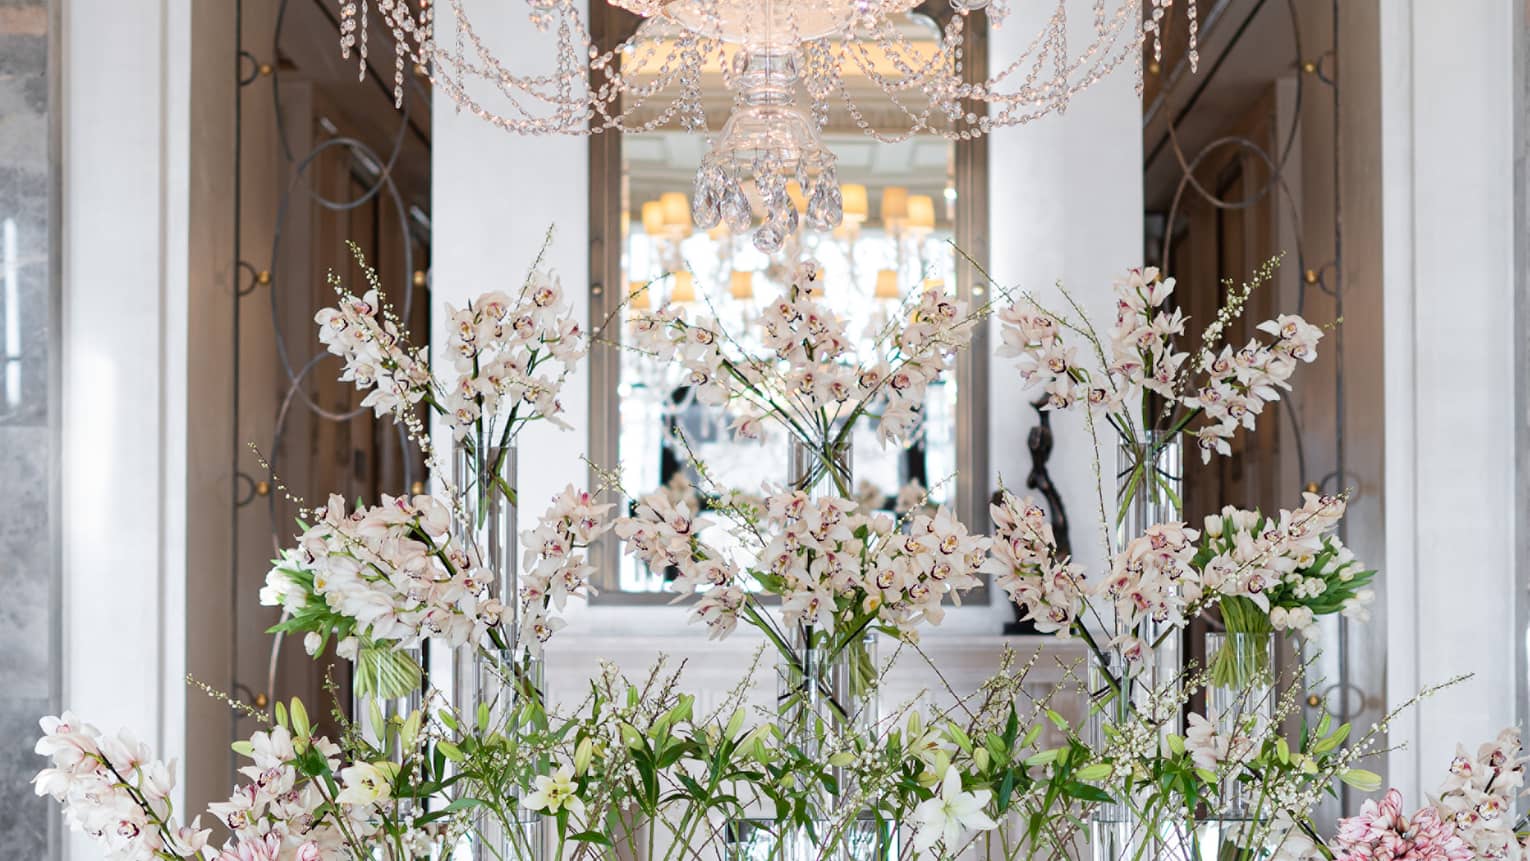 Hotel lobby with large crystal chandelier hanging over floral display in crystal vases